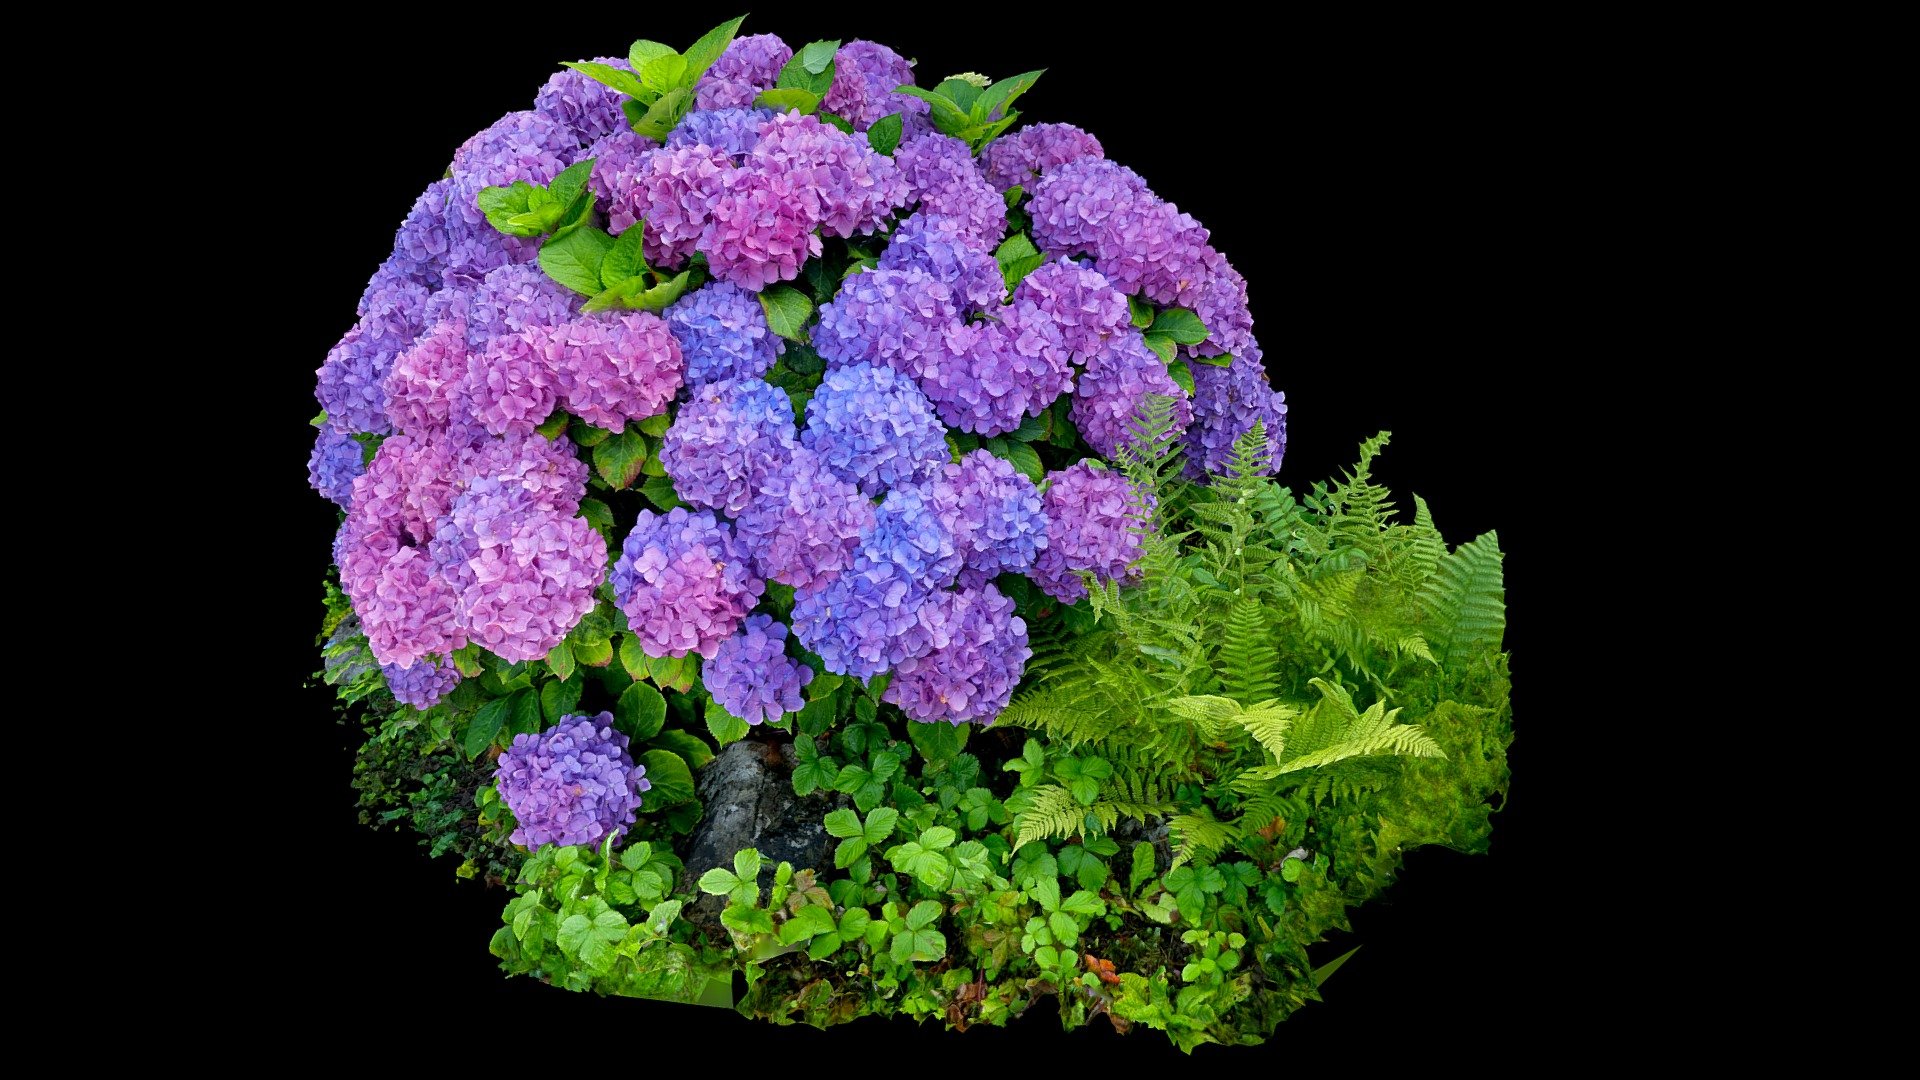 Hydrangea est un genre d'arbuste et d'arbre appartenant à la famille des Hydrangeaceae dont l'espèce la plus connue, Hydrangea macrophylla, est une plante horticole dénommée Hortensia. 

Hydrangea (/haɪˈdreɪndʒⁱə/;[1] common names hydrangea or hortensia) is a genus of 70–75 species of flowering plants native to southern and eastern Asia (China, Japan, Korea, the Himalayas, and Indonesia) and the Americas. By far the greatest species diversity is in eastern Asia, notably China, Japan, and Korea. Most are shrubs 1 to 3 meters tall, but some are small trees, and others lianas reaching up to 30 m (98 ft) by climbing up trees.
(Wikipedia) - Hortensia - Hydrangea - Buy Royalty Free 3D model by LZ Creation (@jmch) 3d model